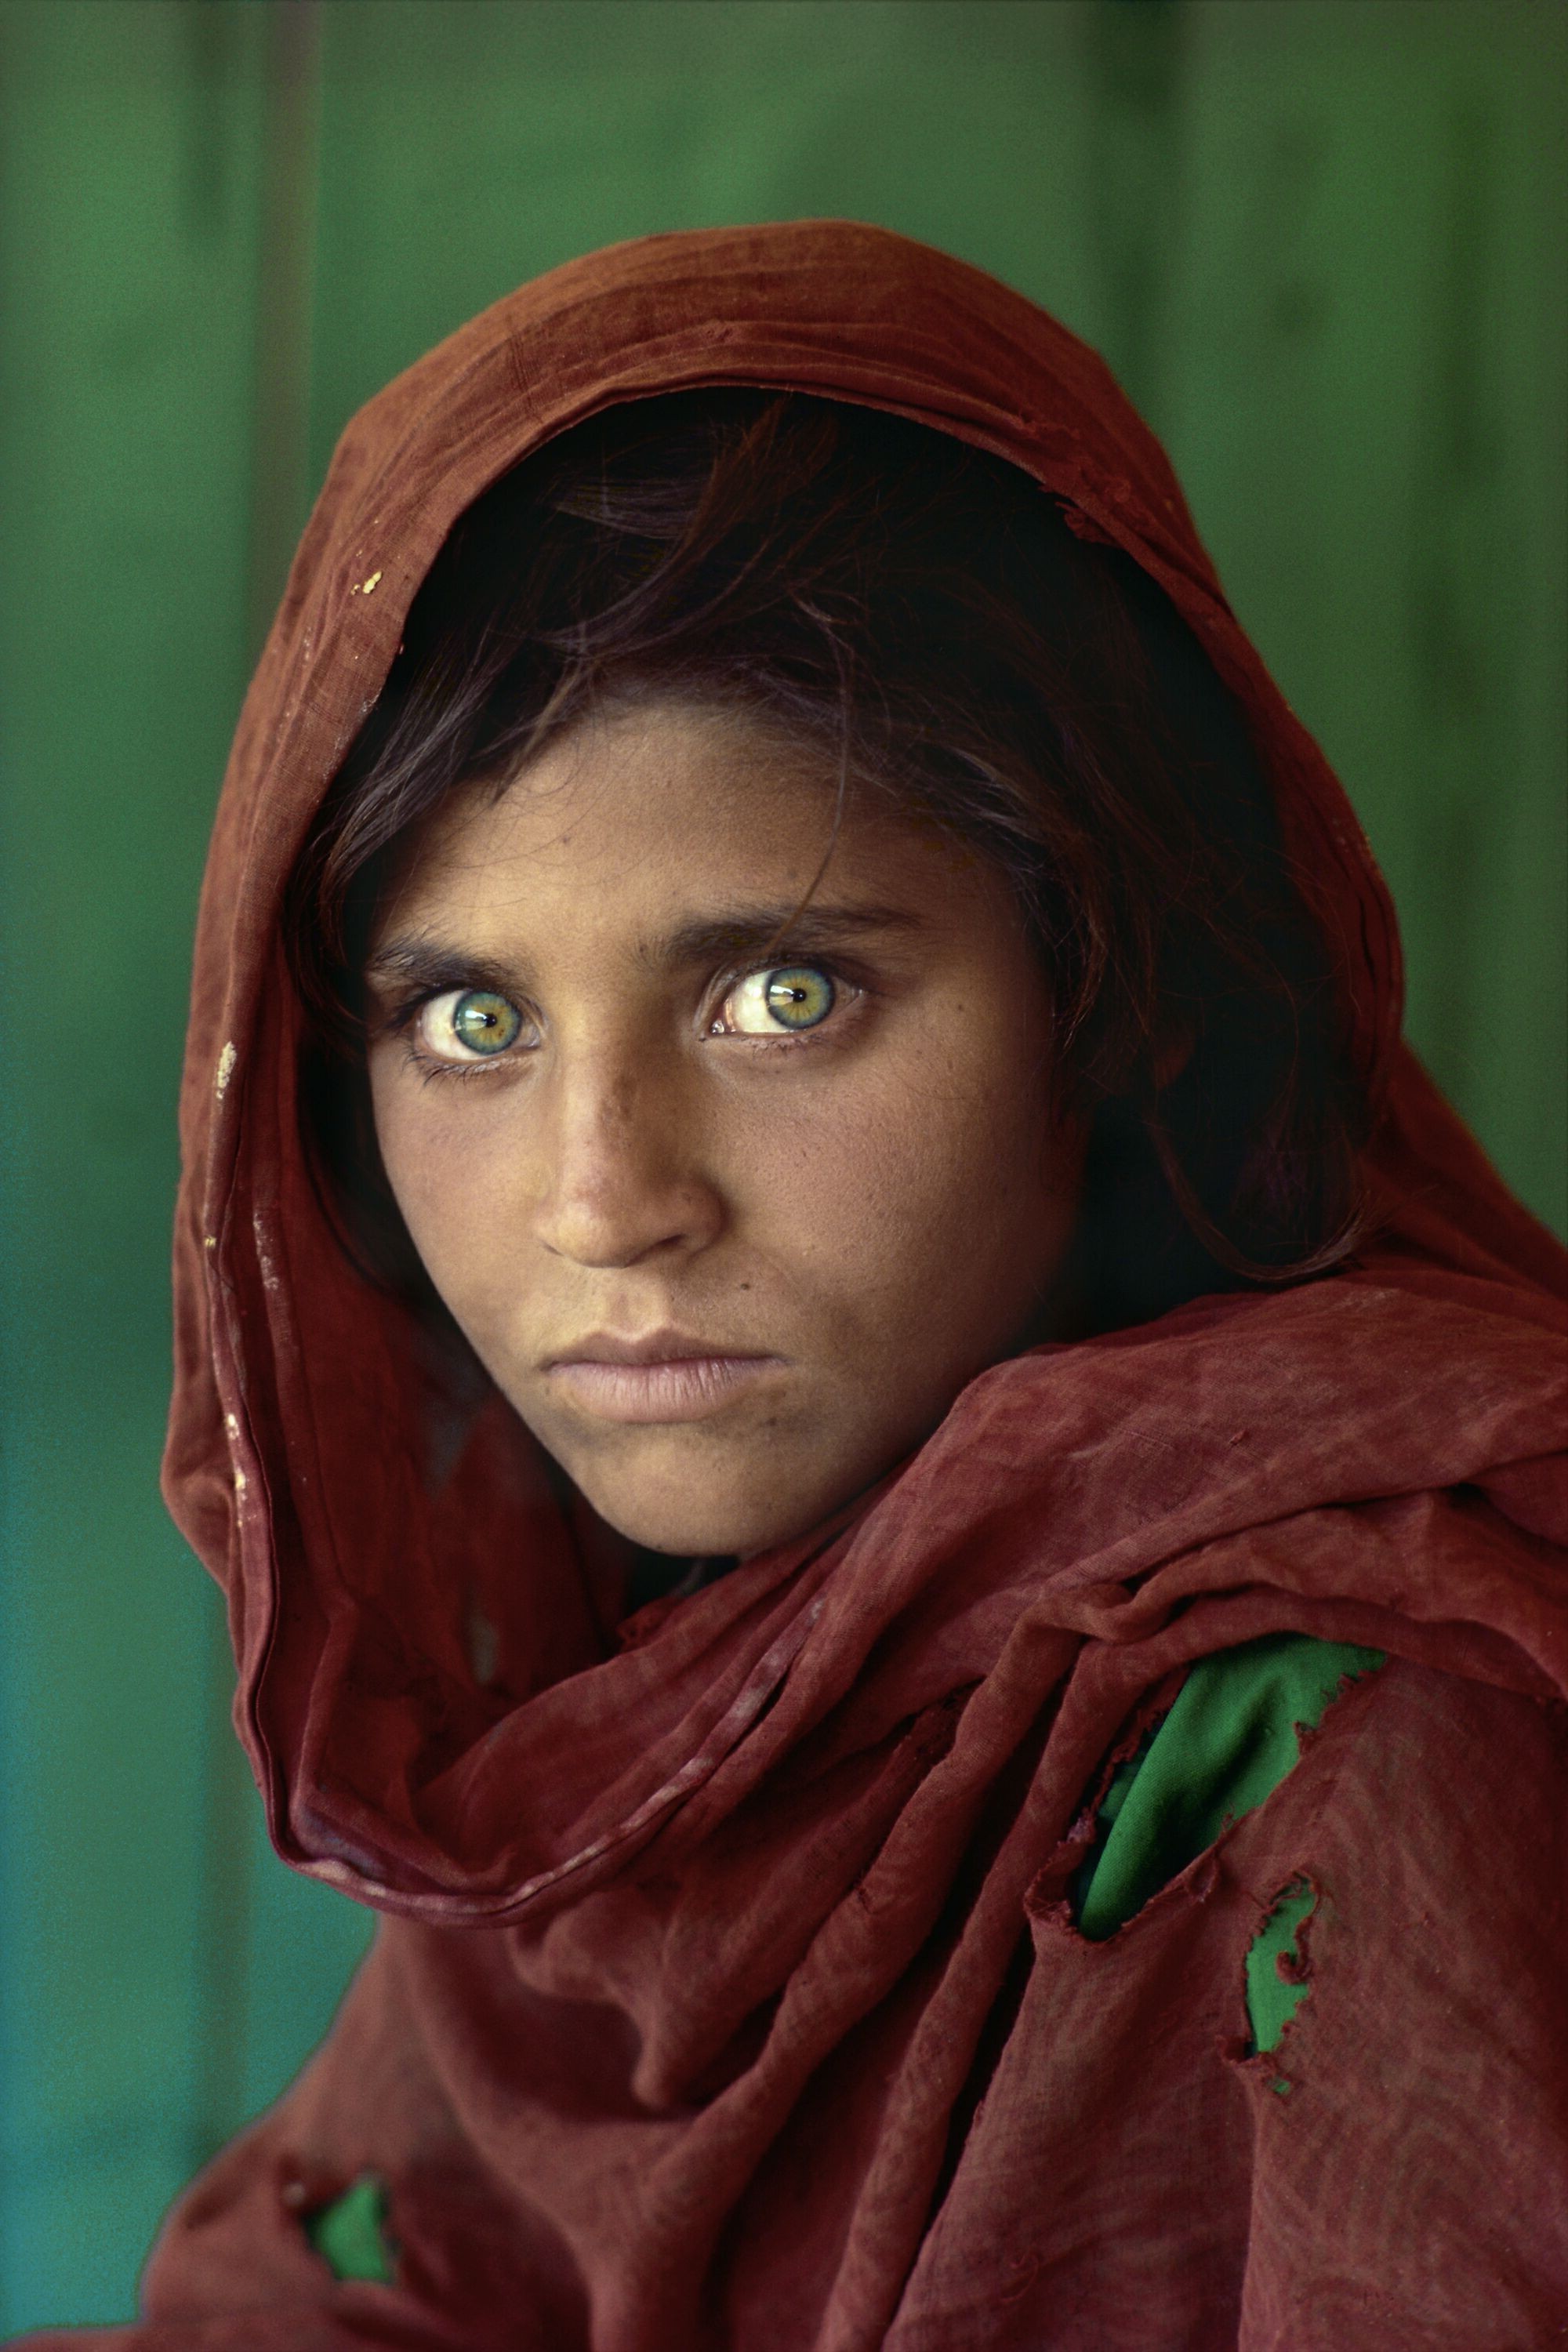 Foto Afgan Hd Finding The Afghan Girl National Geographic Youtube